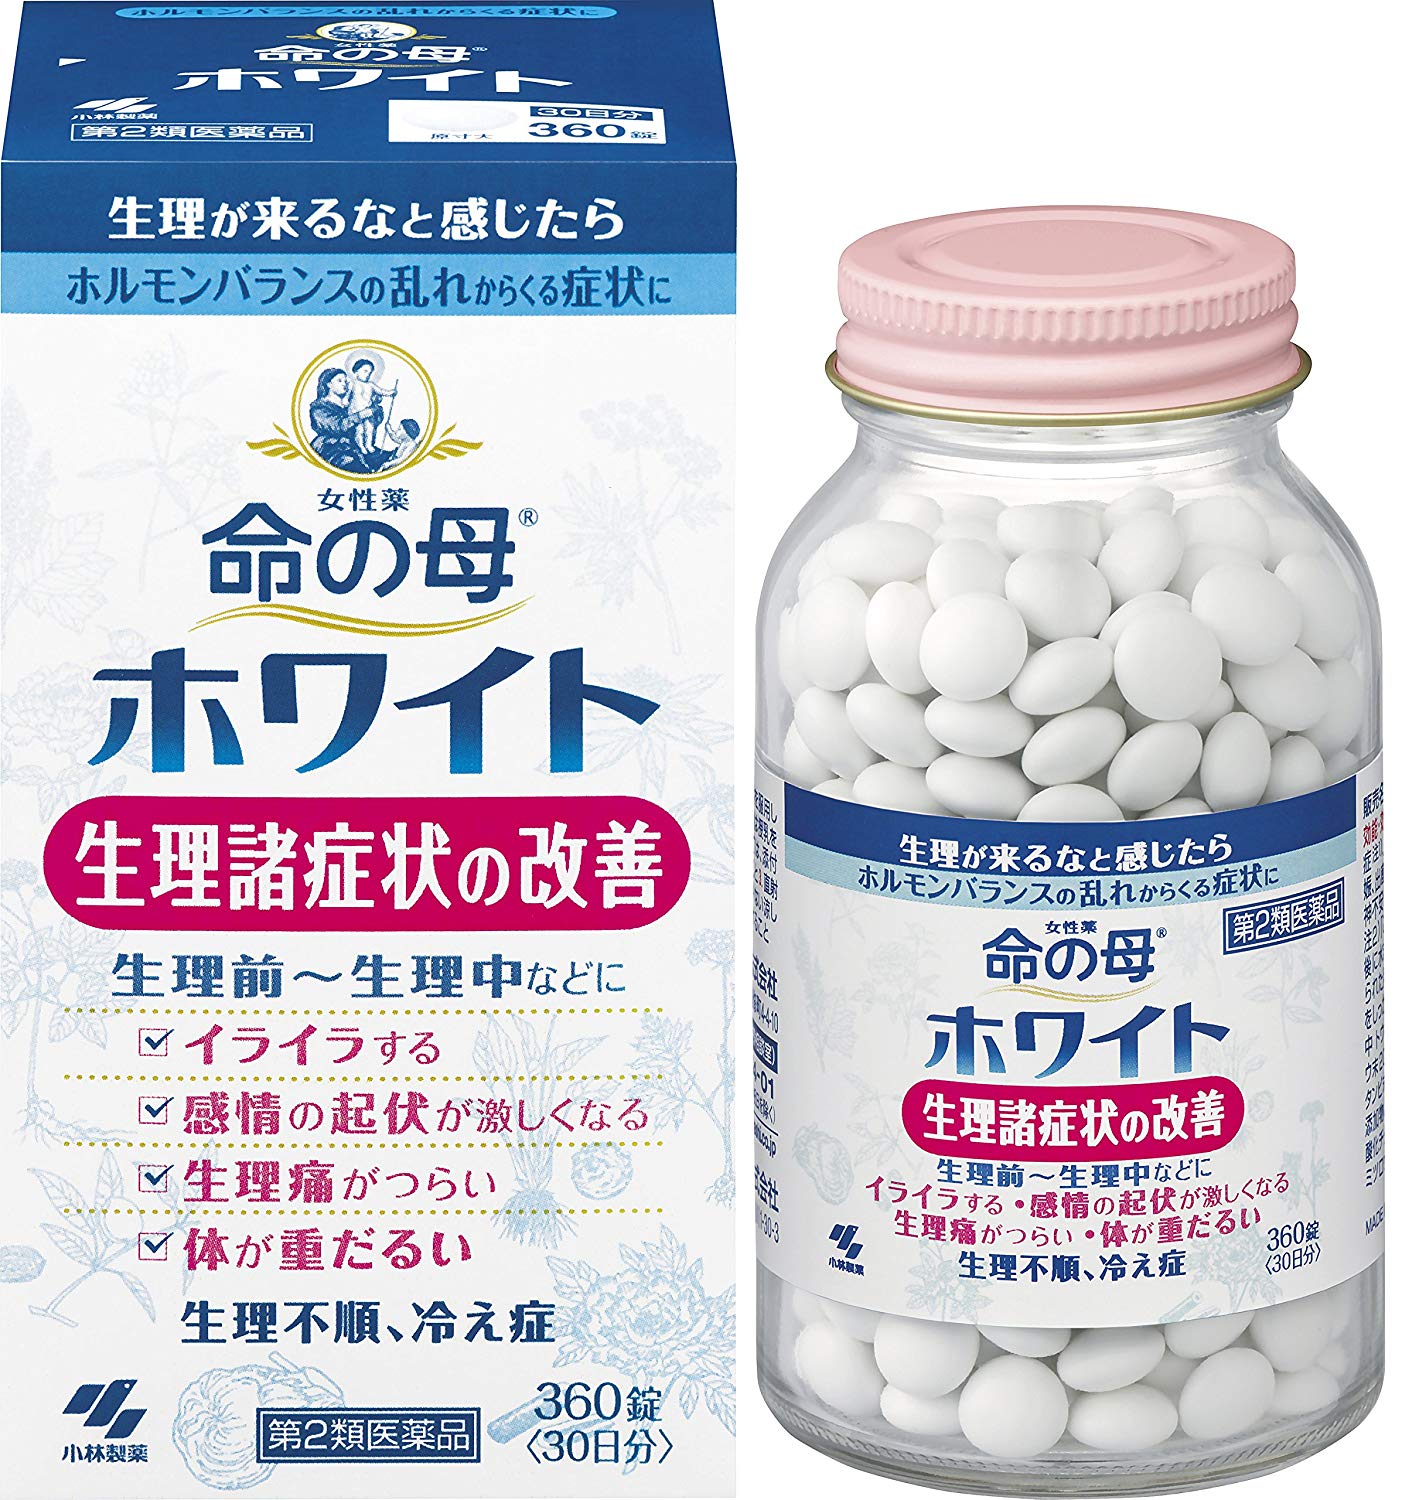 INOCHI NO HAHA WHITE - a complex for restoring and maintaining a hormonal balance in women during the menstrual cycle, for 30 days